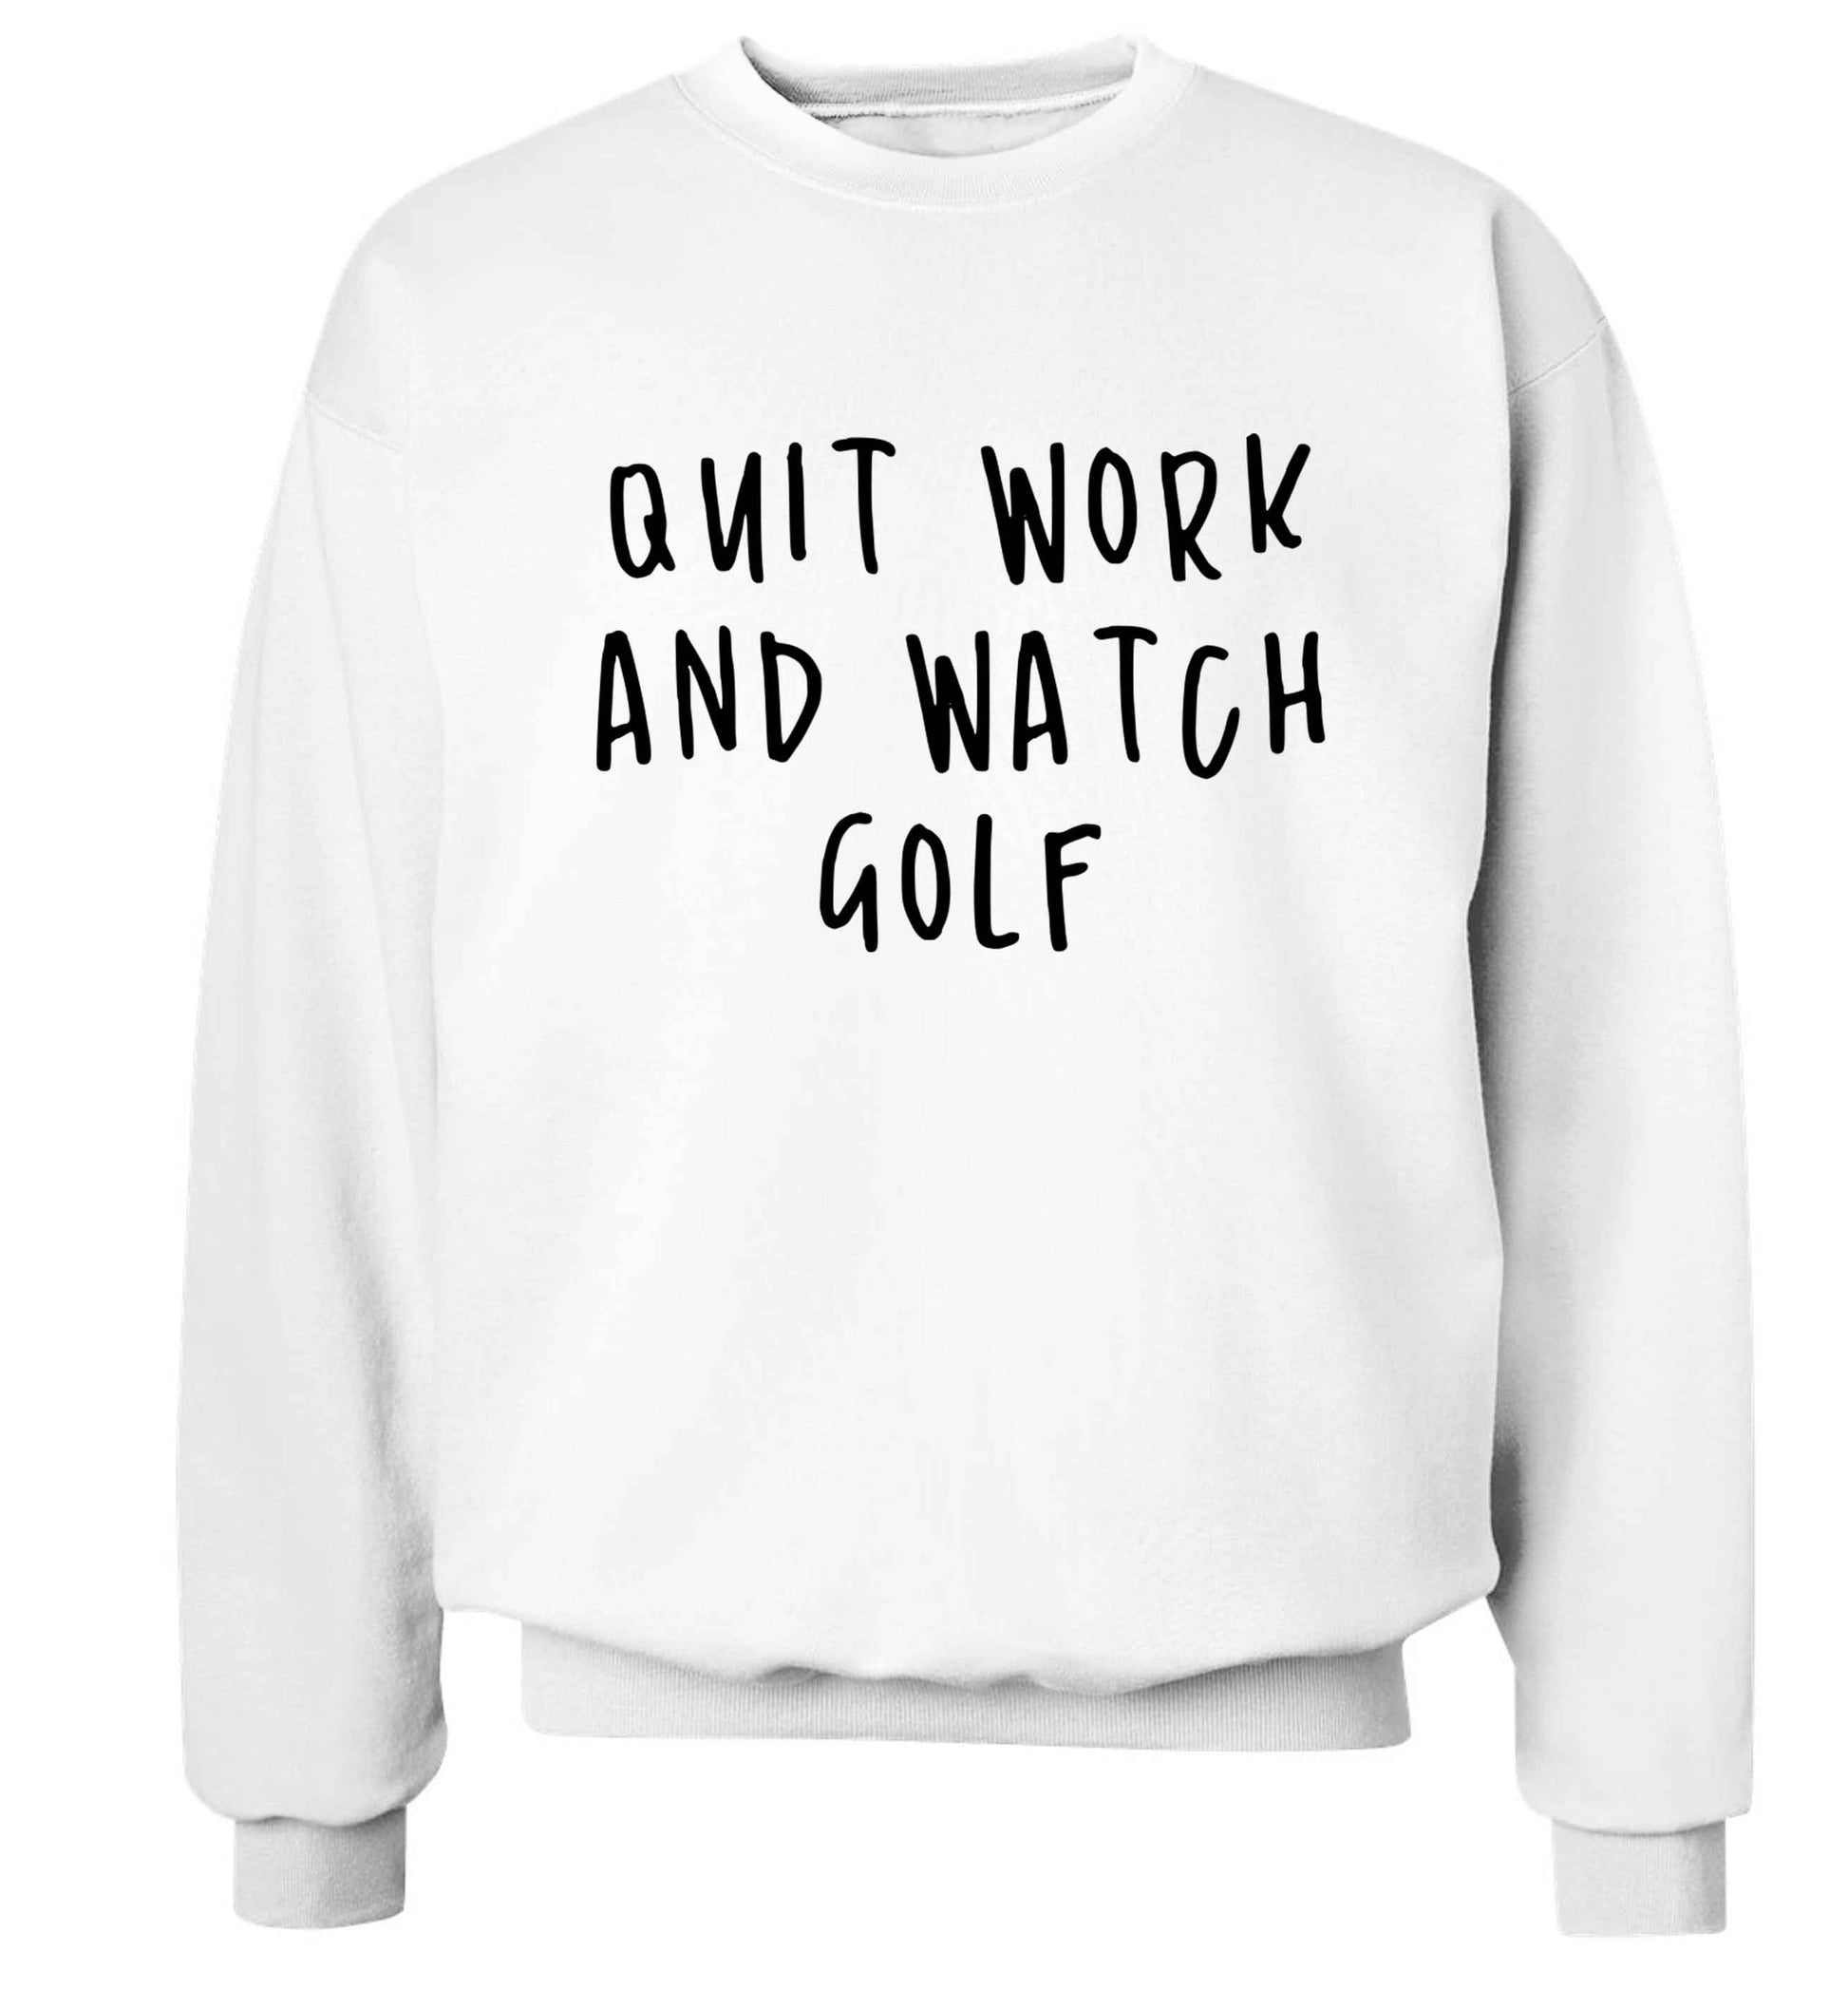 Quit work and watch golf Adult's unisex white Sweater 2XL